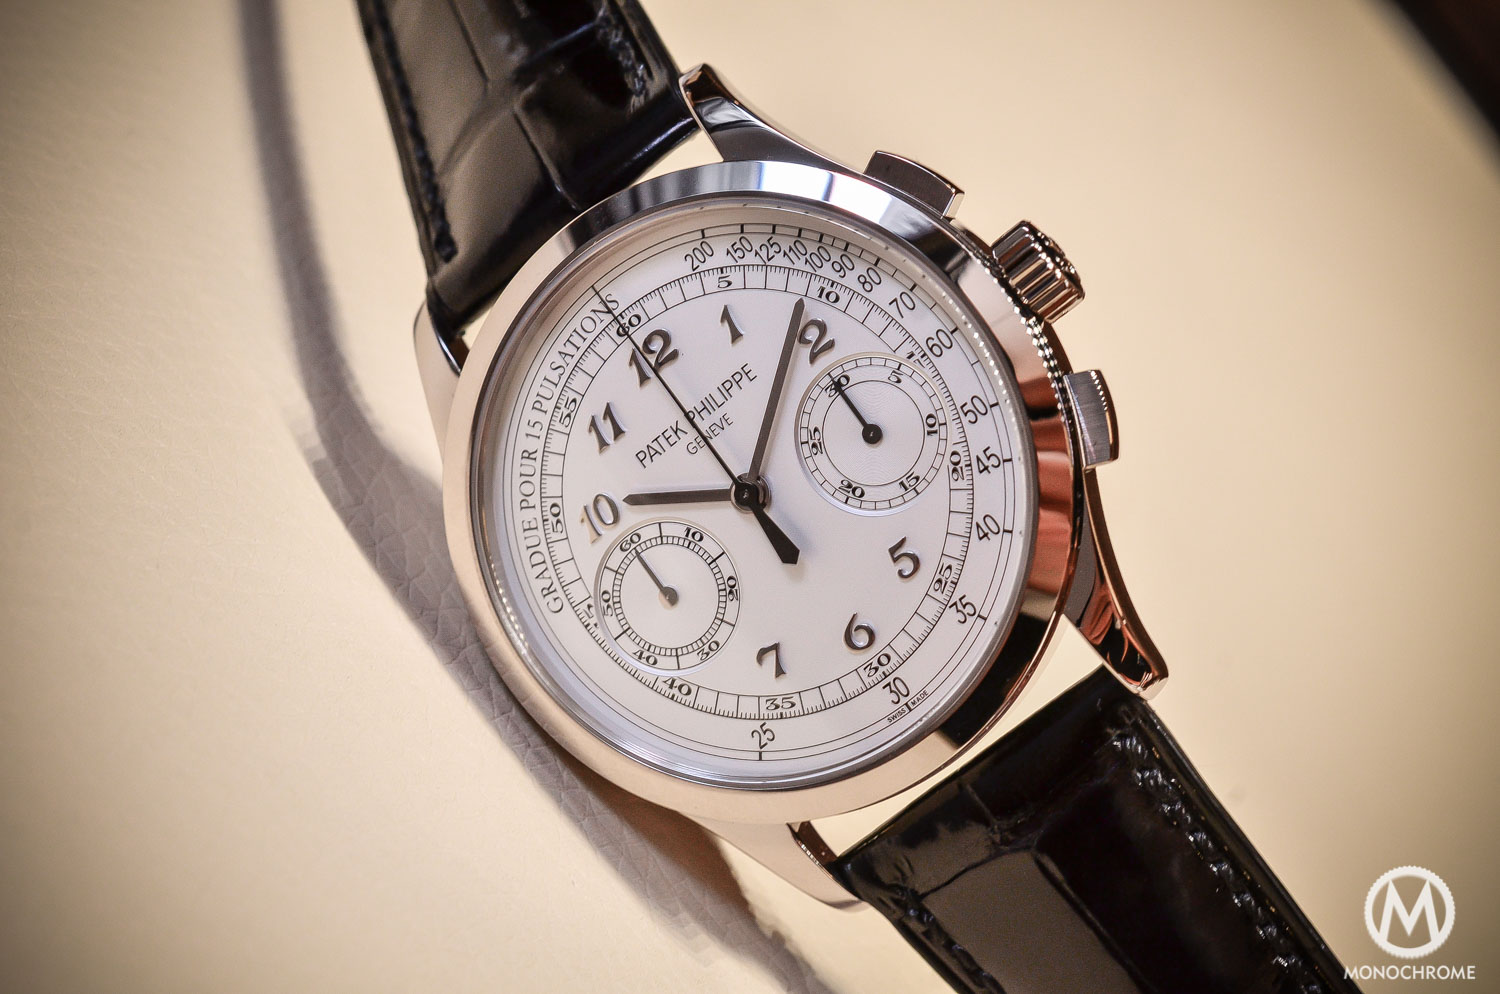 Patek Philippe 5170g-001 Chronograph - review - case and dial